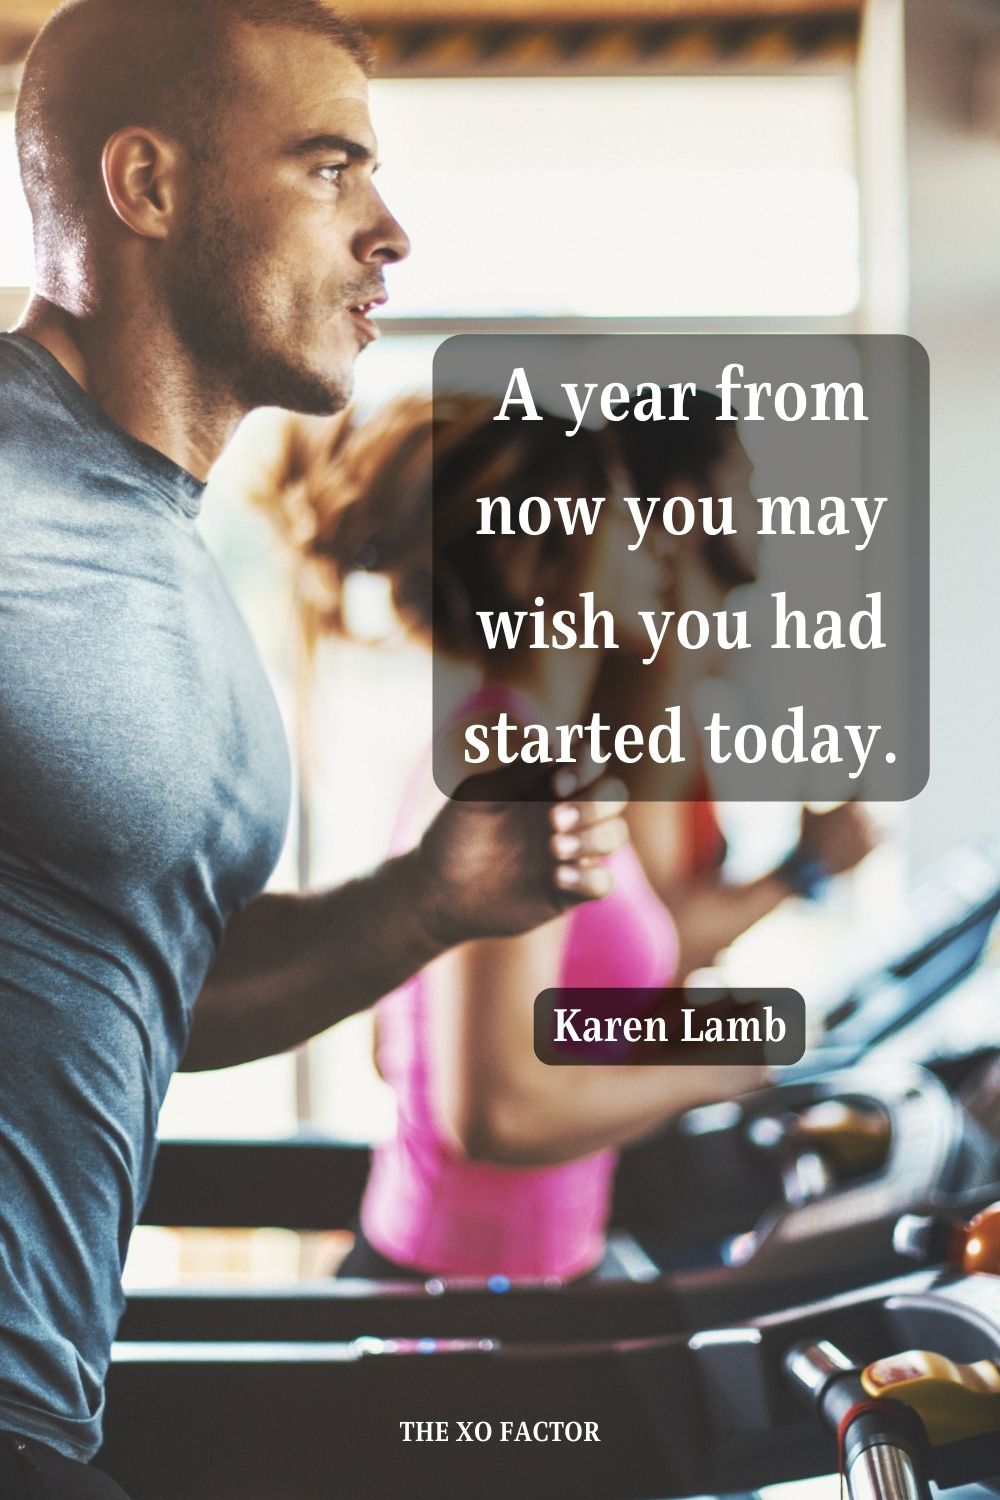 A year from now you may wish you had started today. Karen Lamb